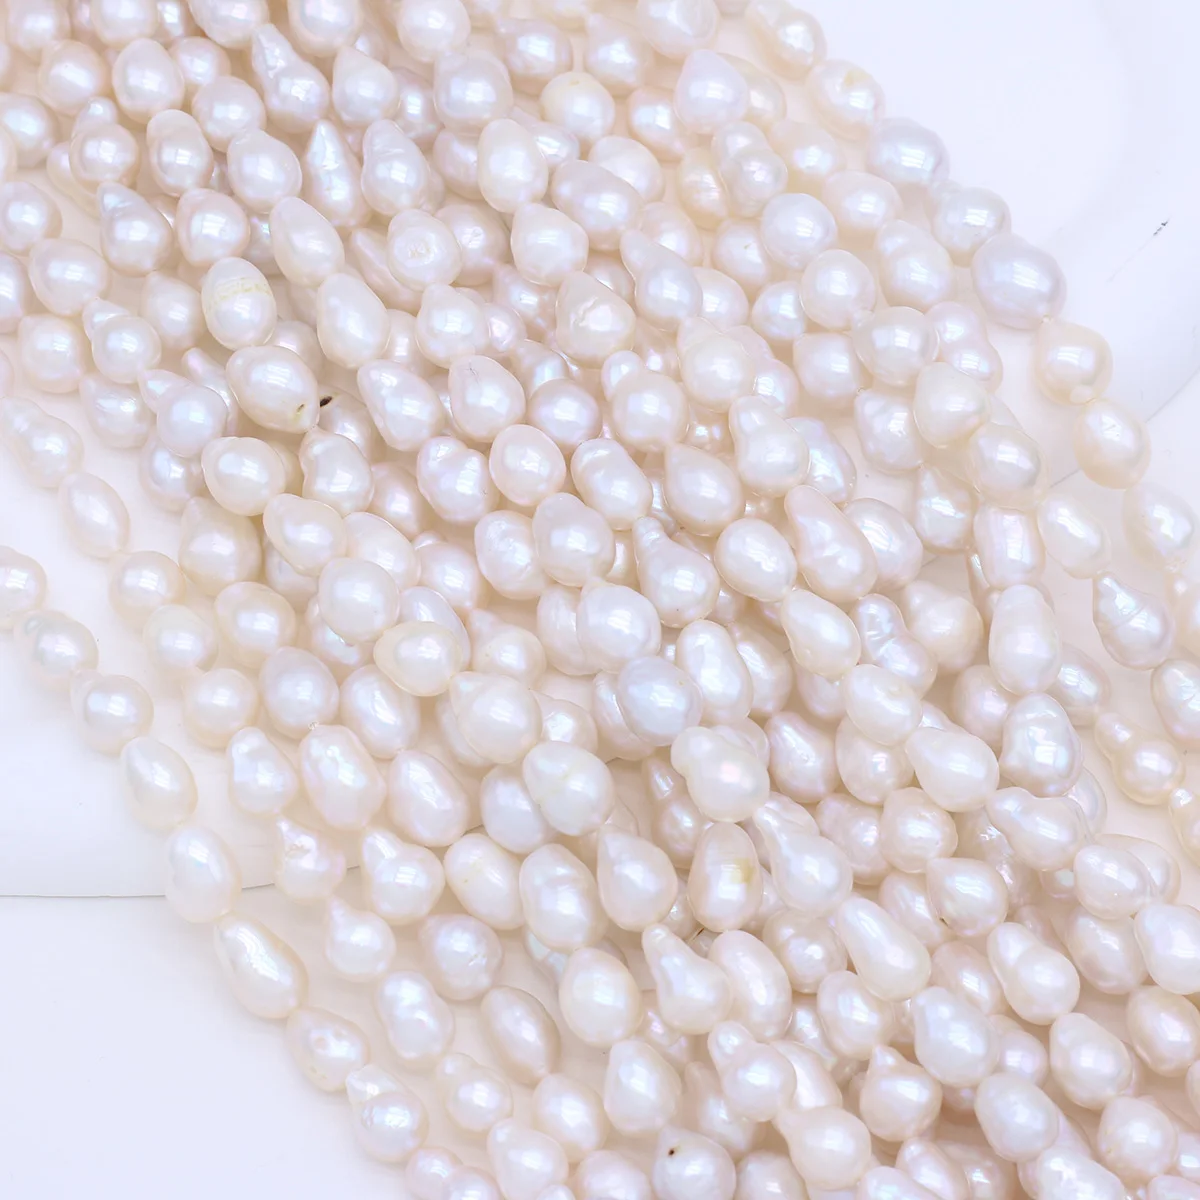 Купи Natural Fresh Water Pearl Necklace Irregular White Water Drop Shaped Beads Pearl Beads for Women Jewelry Party Banquet Gift за 799 рублей в магазине AliExpress